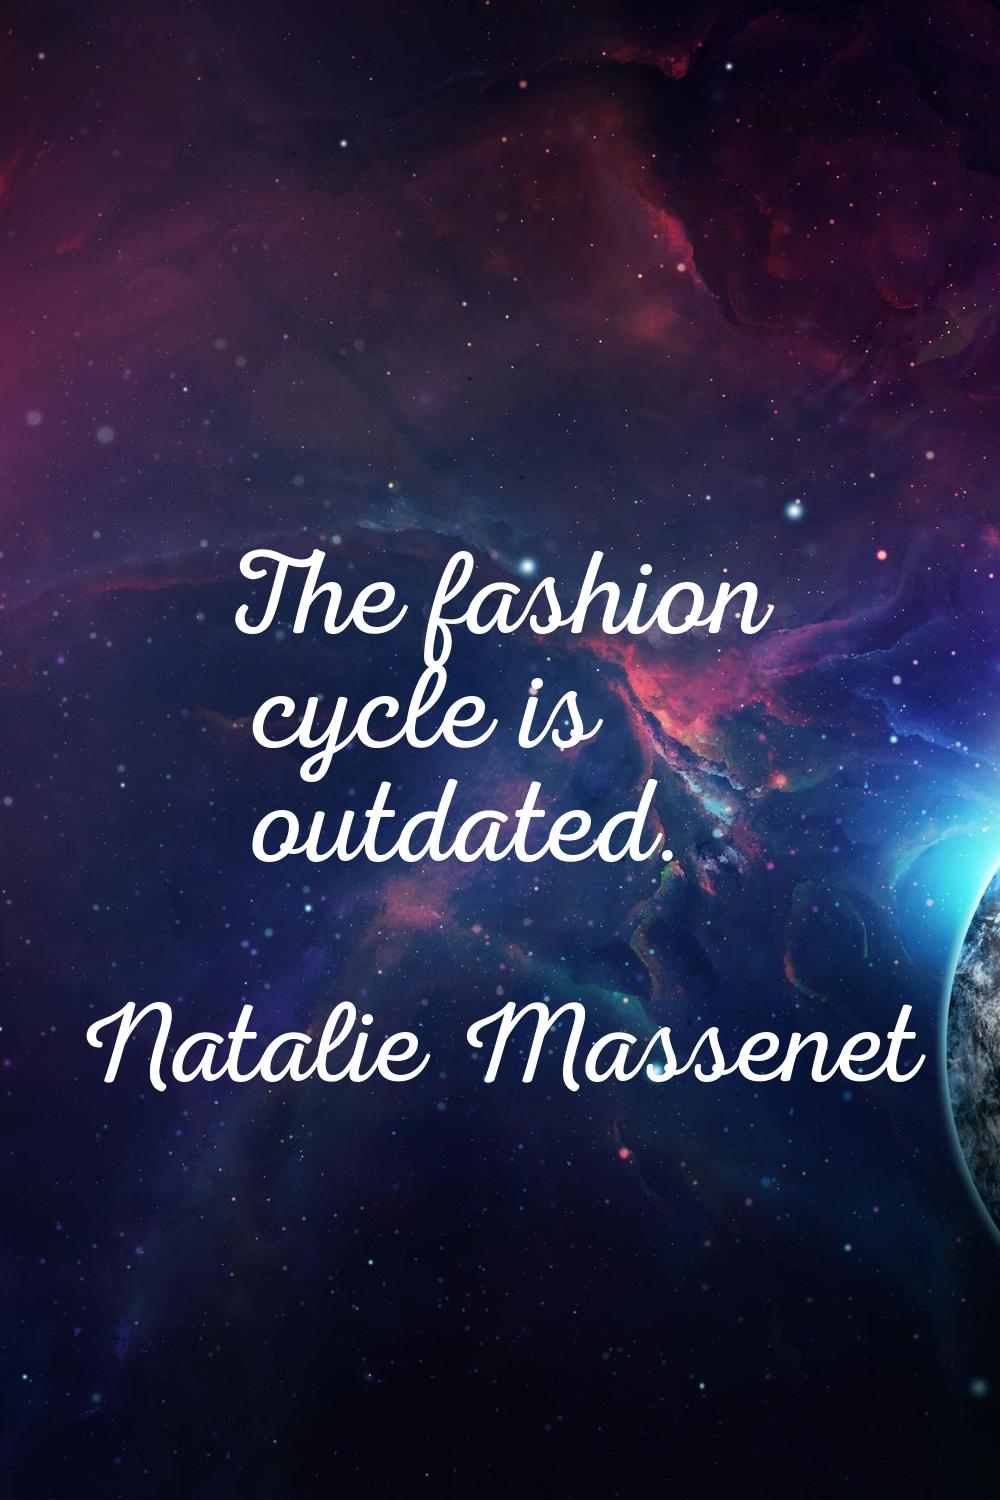 The fashion cycle is outdated.